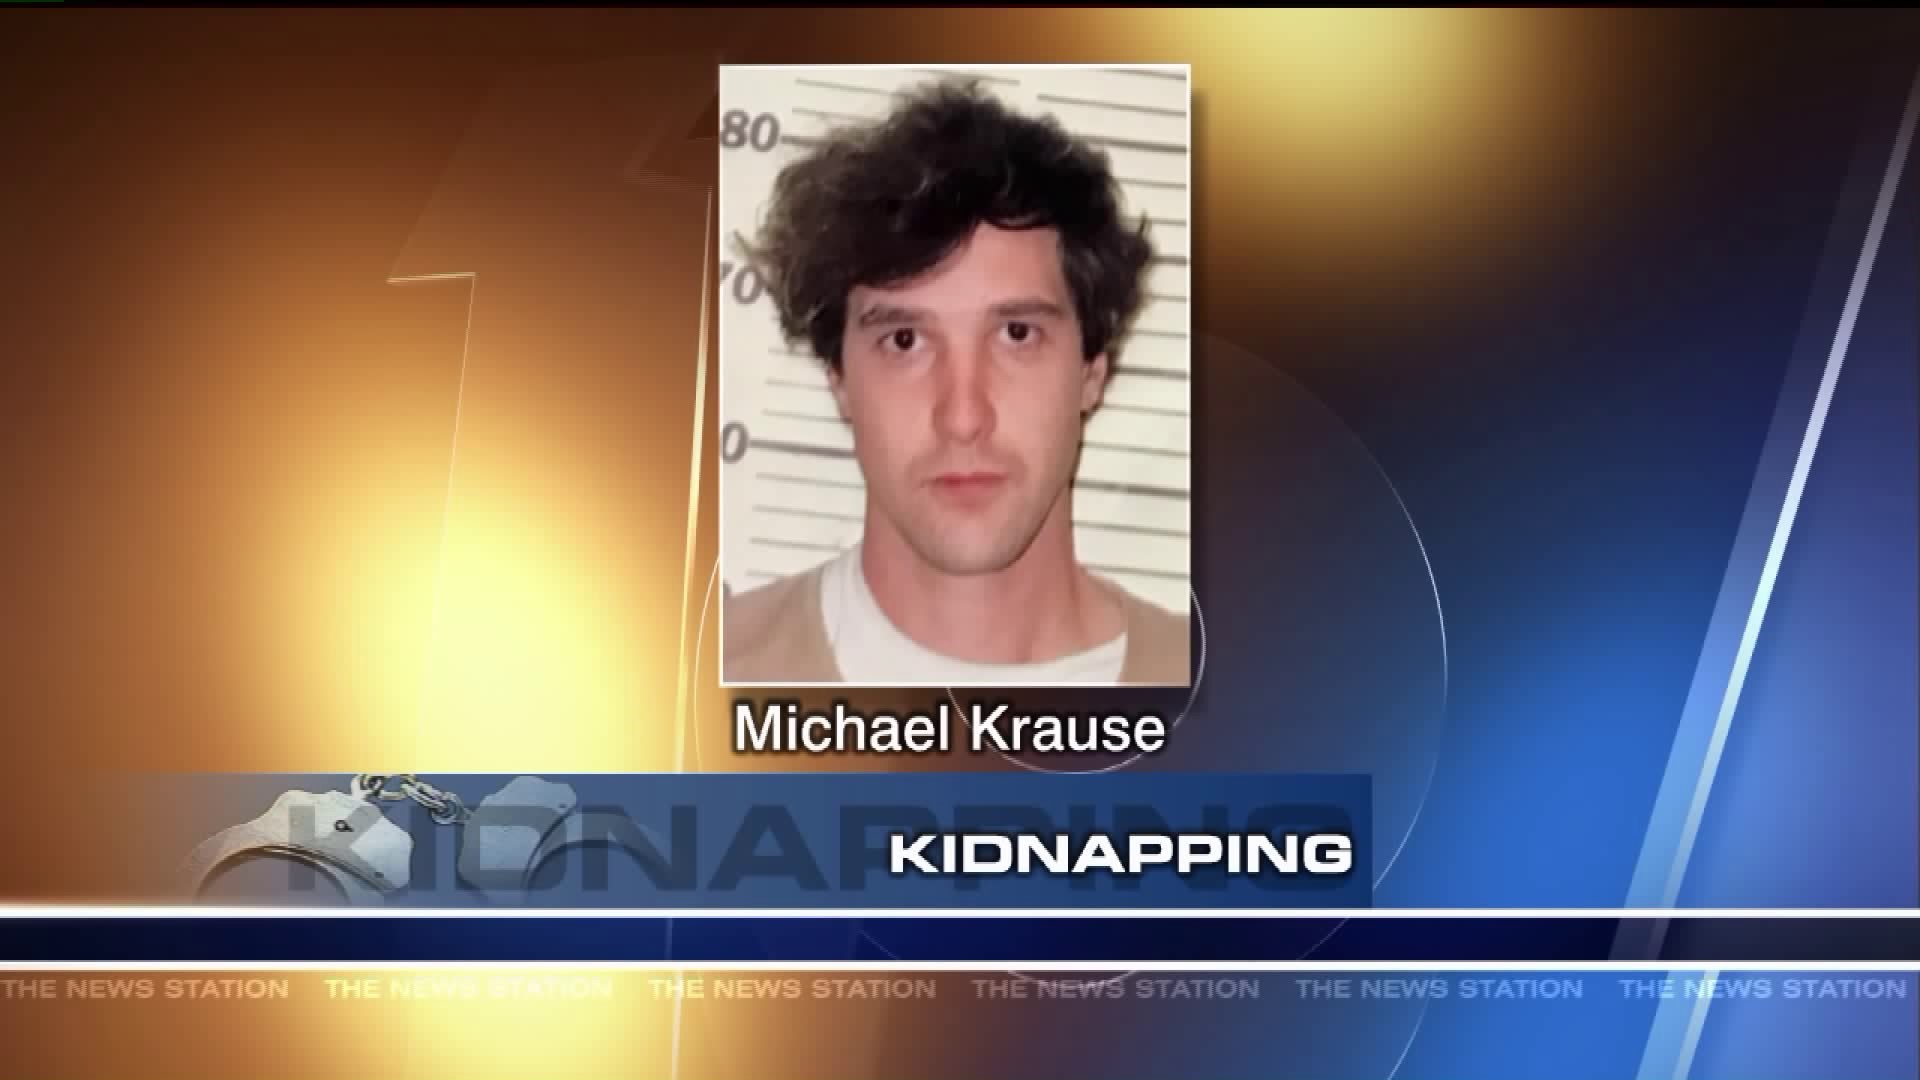 Police Charge Man with Kidnapping Woman in Schuylkill County